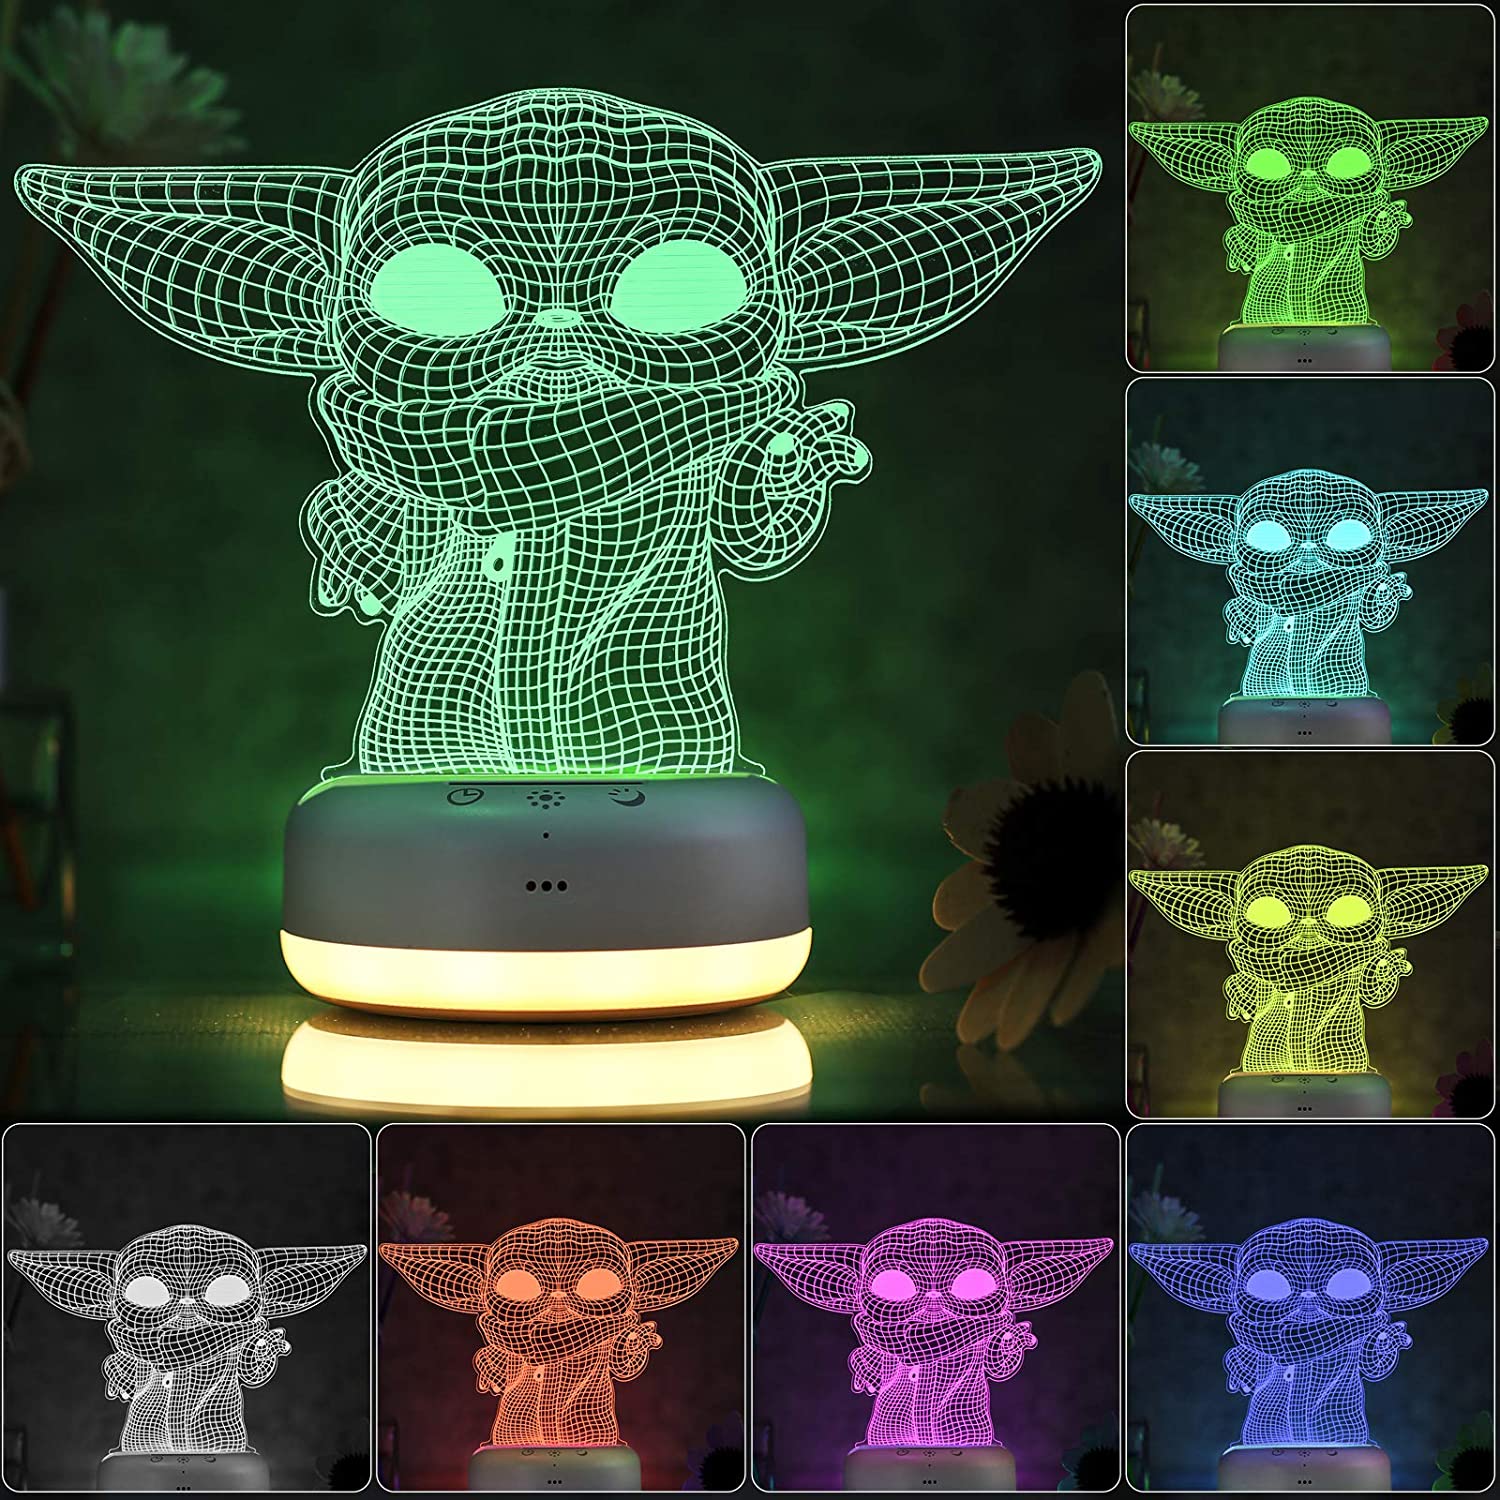 3D Star Wars Night Light for Kids - 3 Patterns & 16 Color Change Decor Lamp with Timer, Remote Control & Touch - Baby Yoda Toys for Boys, Girls- Birthday & Christmas Gifts for Kids and Star Wars Fans